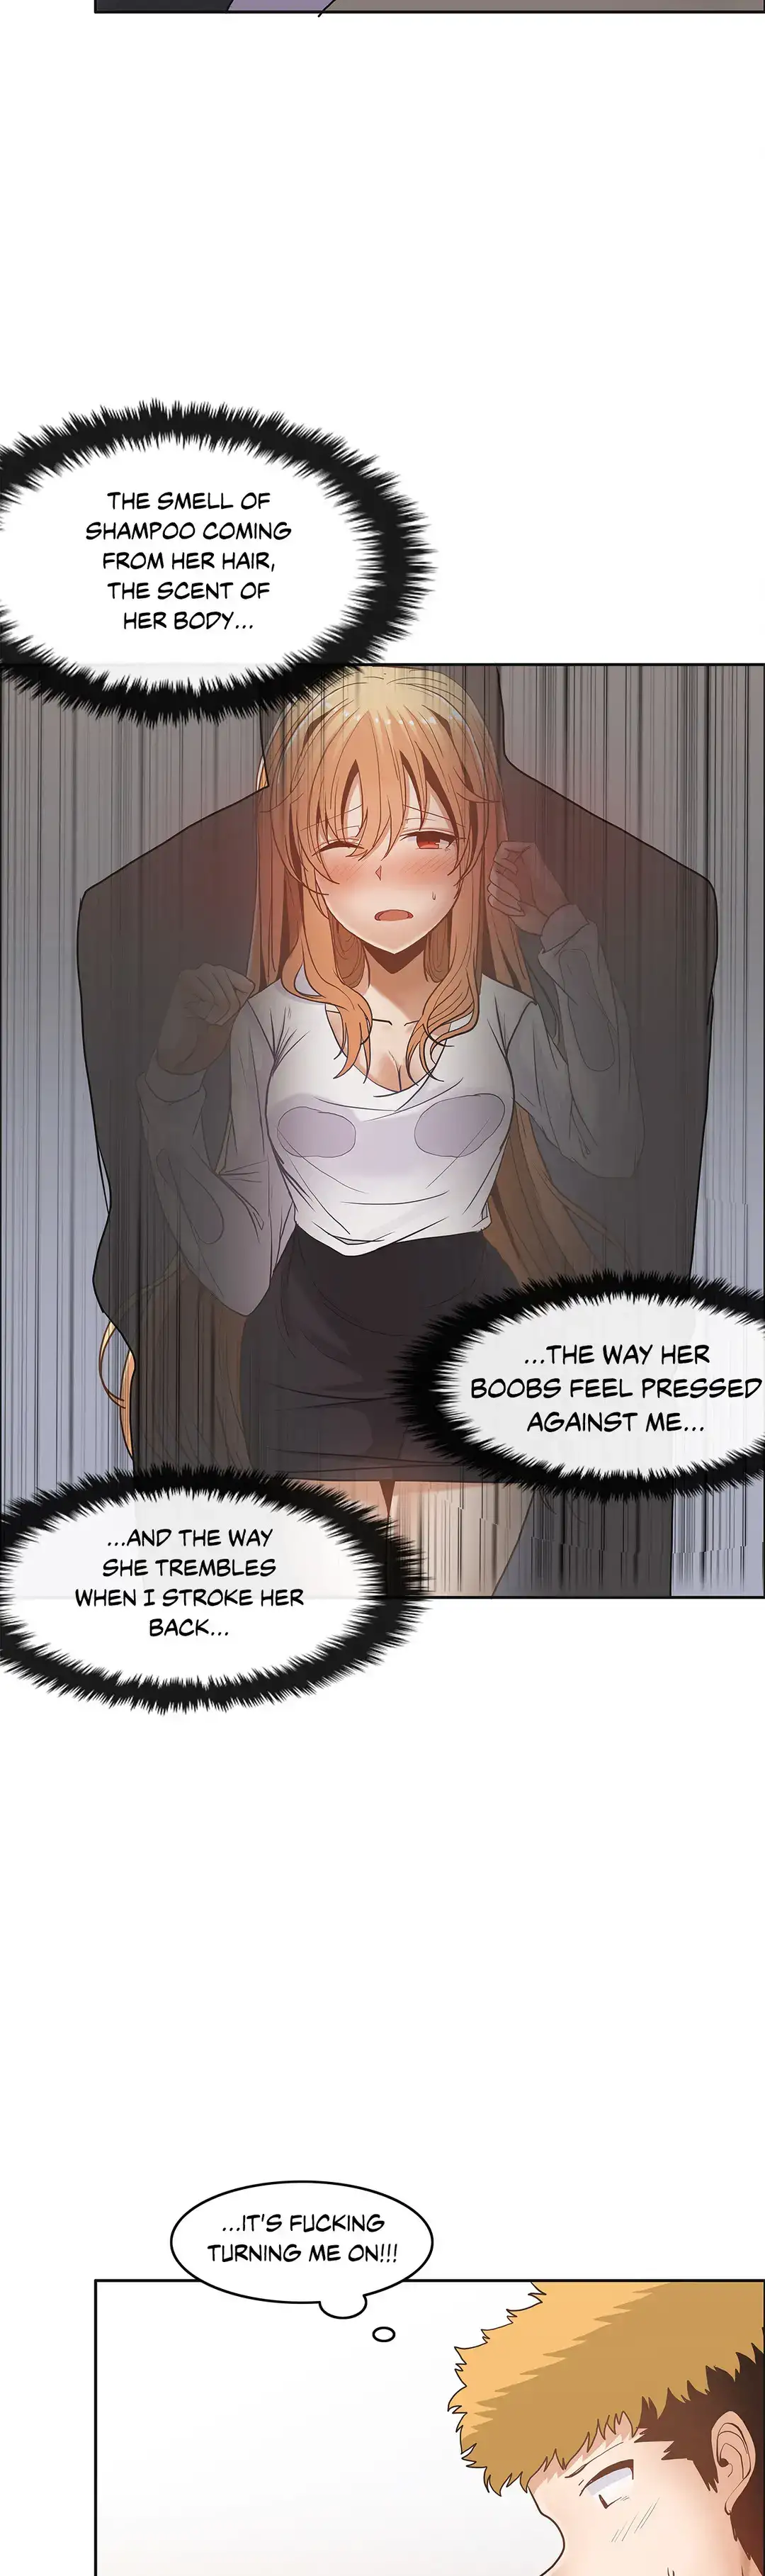 The Girl That Wet the Wall - Chapter 11 Page 17